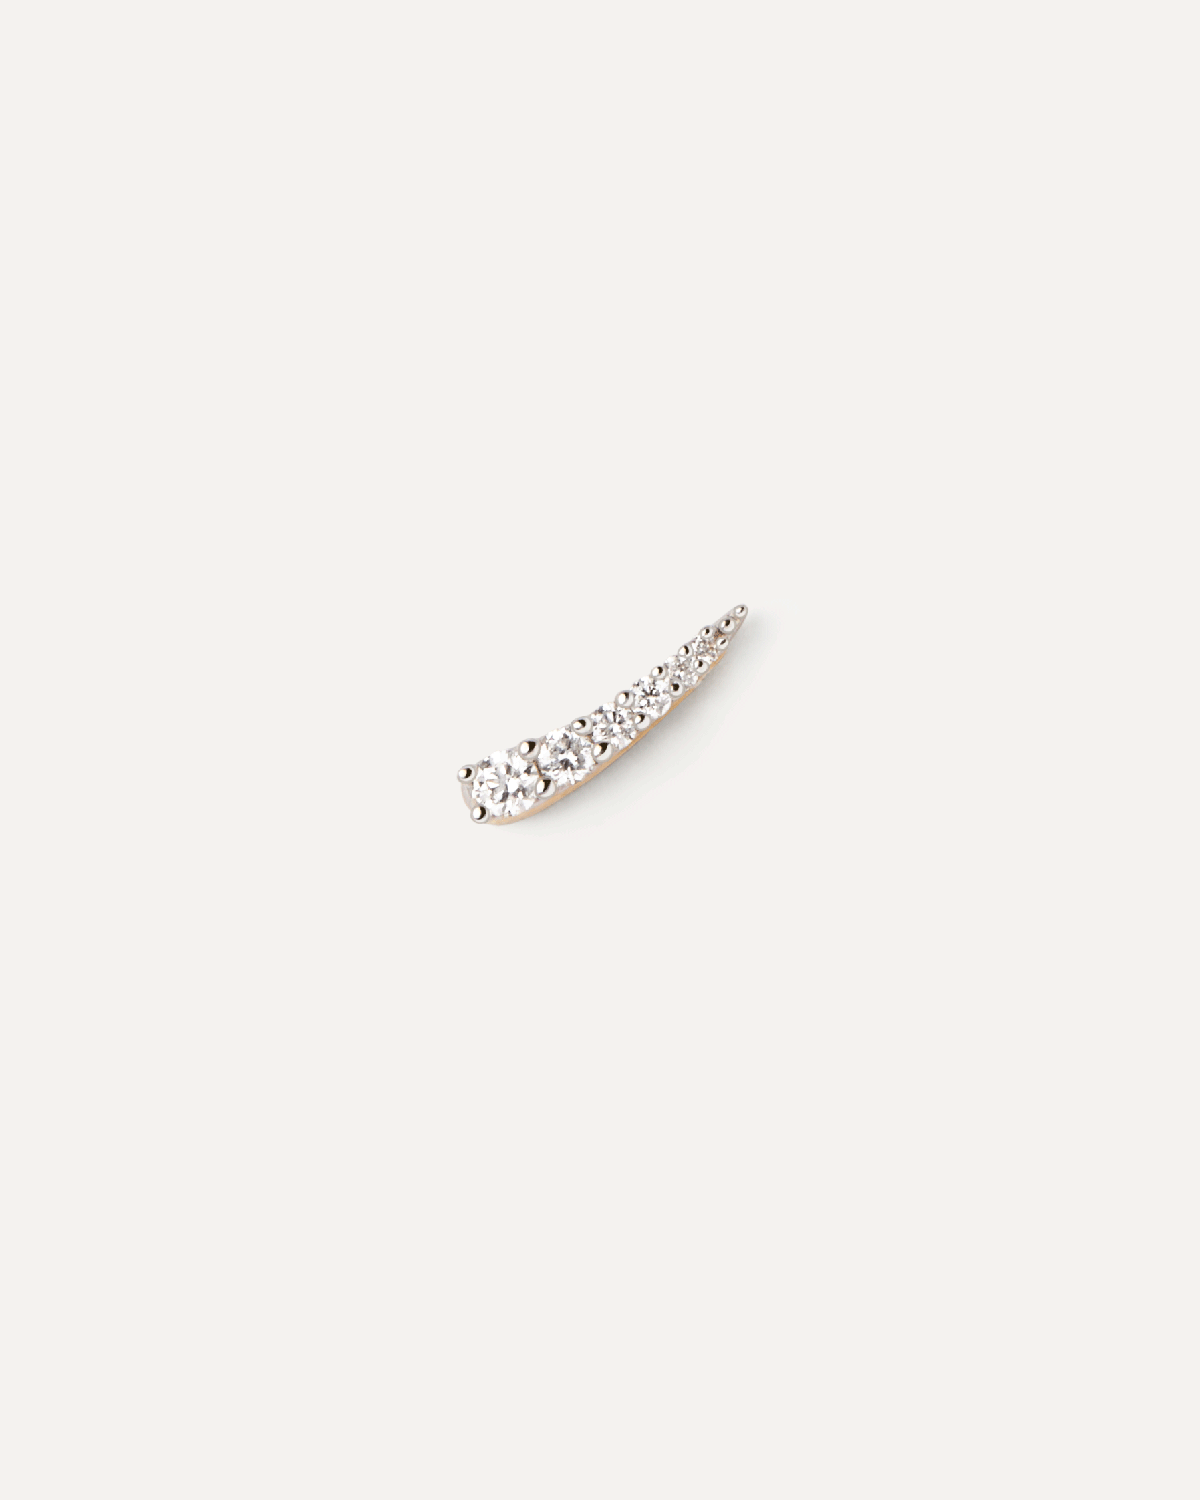 Diamonds and gold Glee single earring. Small stud earring in solid yellow gold with multiple-size lab-grown diamonds in pointed curve. Get the latest arrival from PDPAOLA. Place your order safely and get this Best Seller.